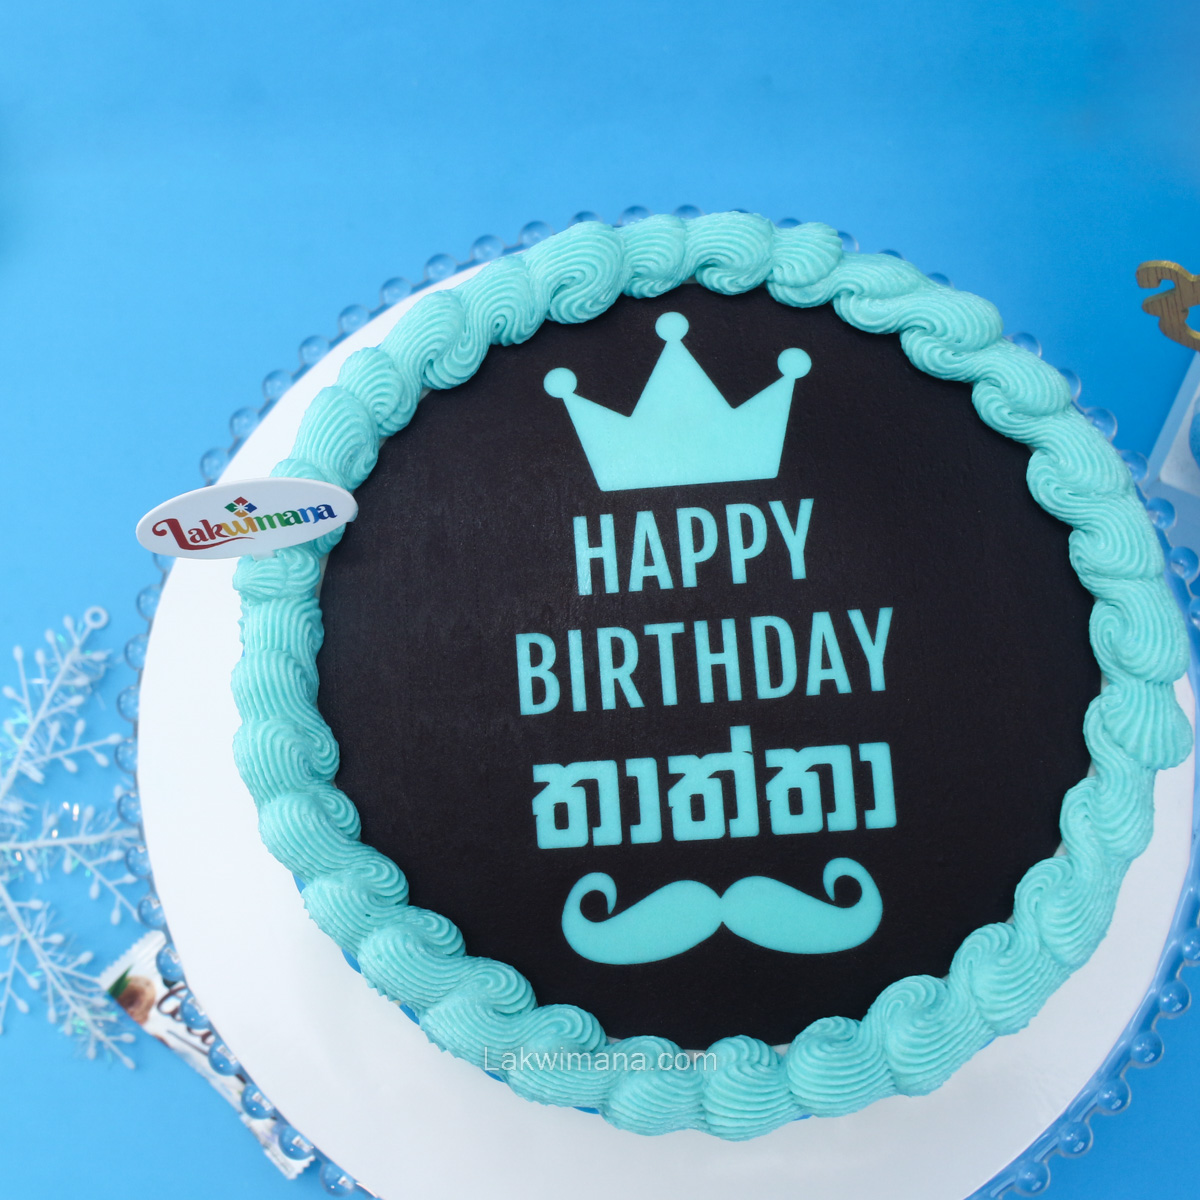 Blog - Do you know how photo is printed on cake?